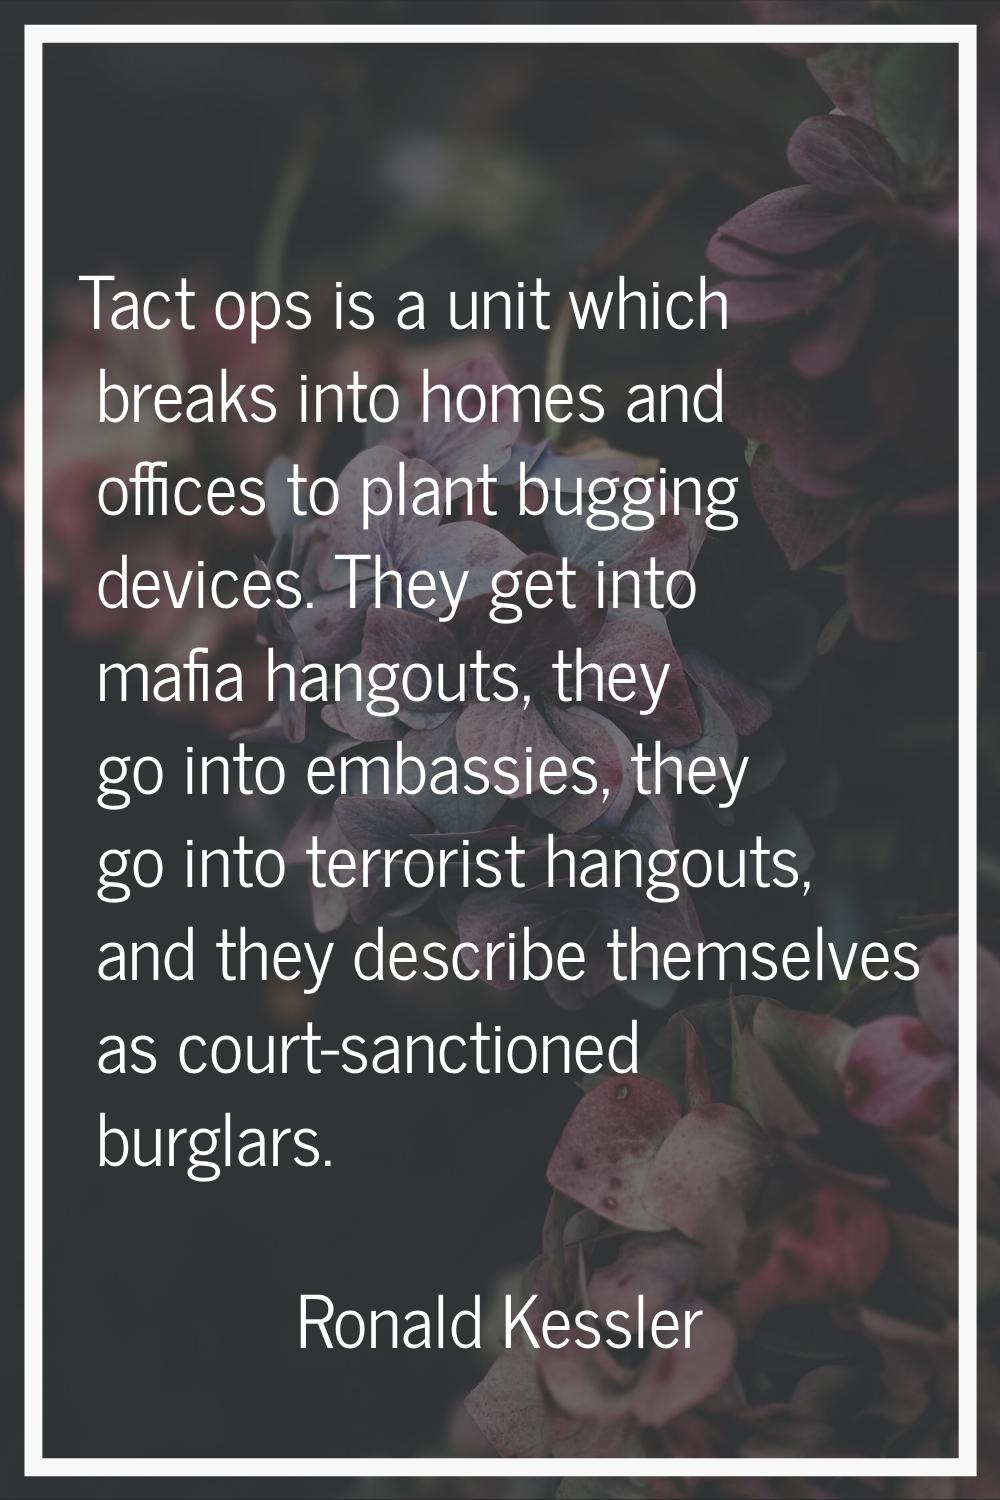 Tact ops is a unit which breaks into homes and offices to plant bugging devices. They get into mafi